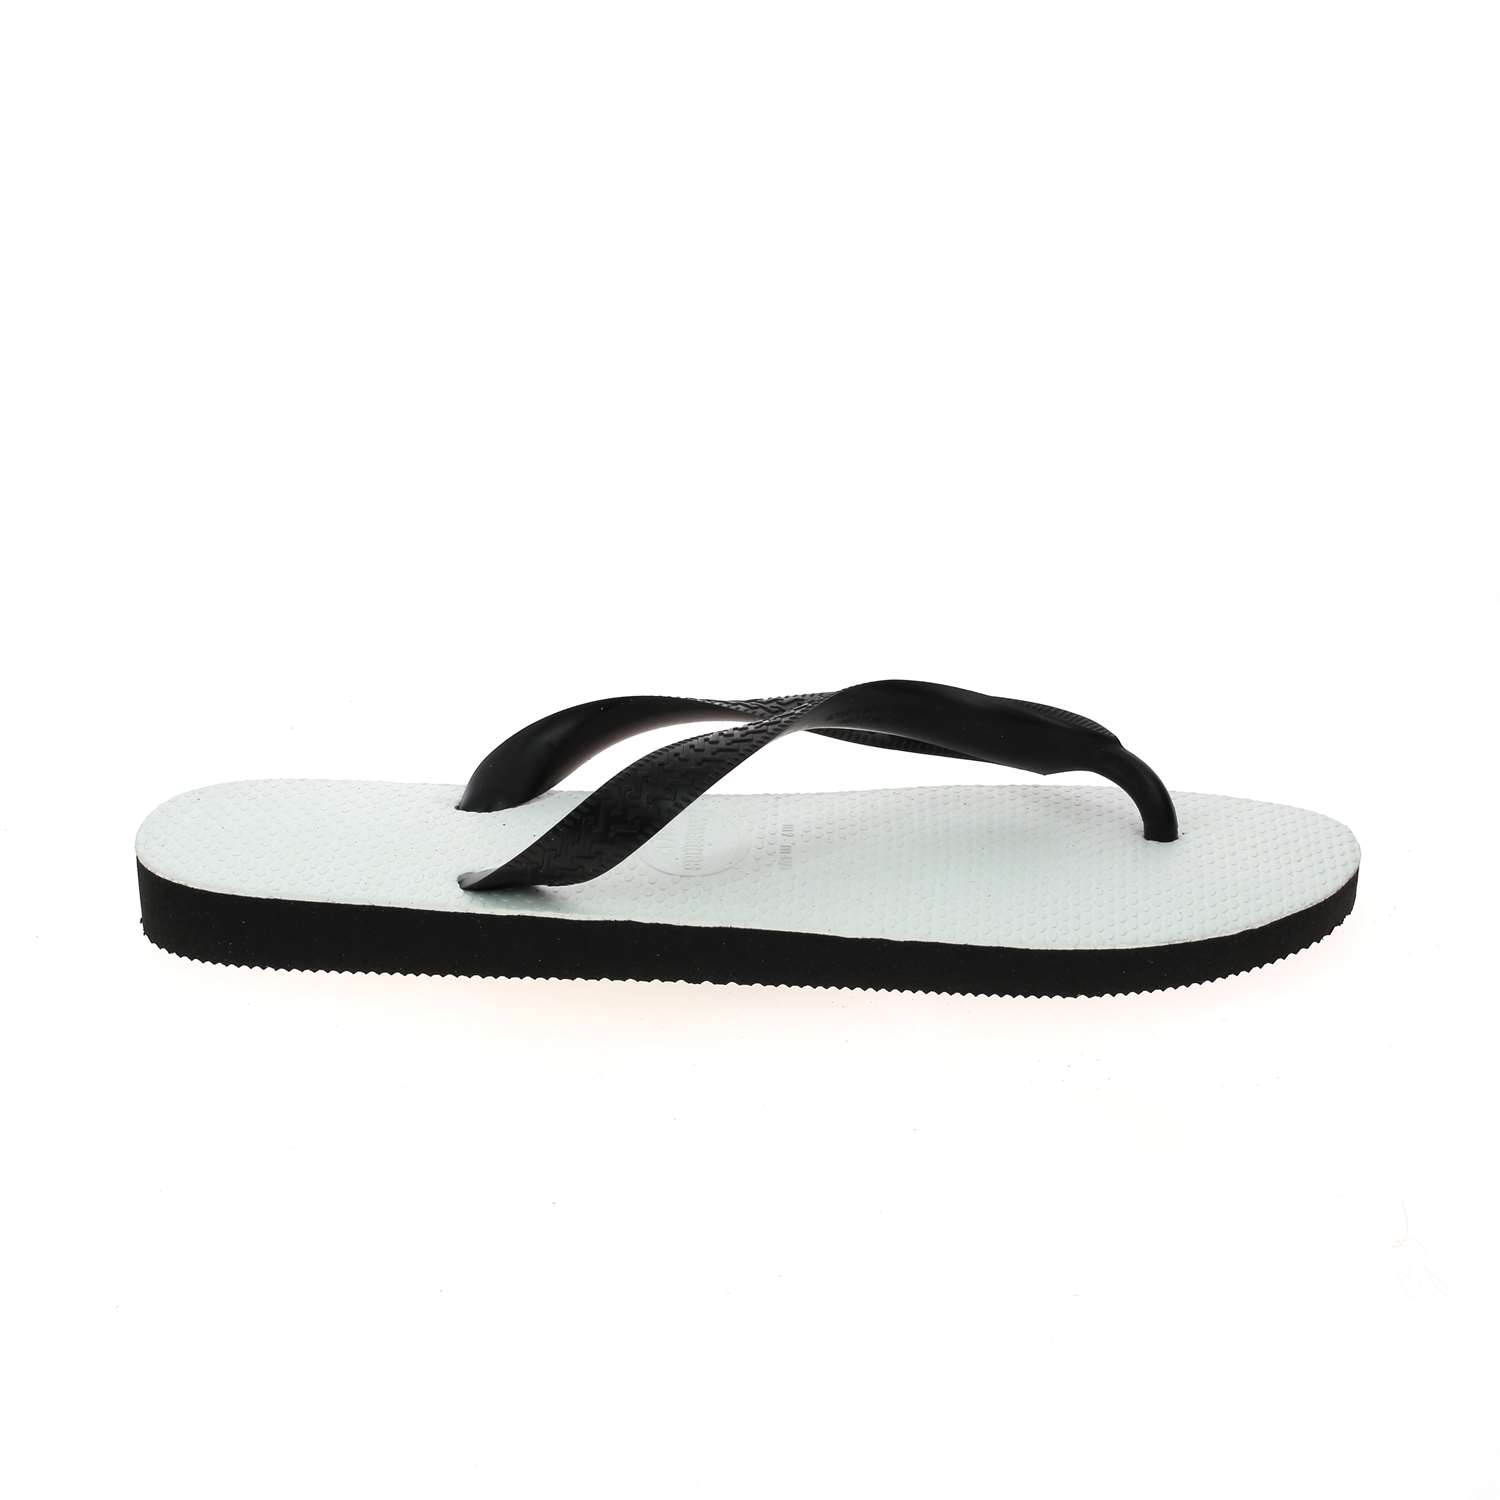 2 - TRADITIONAL - HAVAIANAS - Tongs et crocs - Synthétique